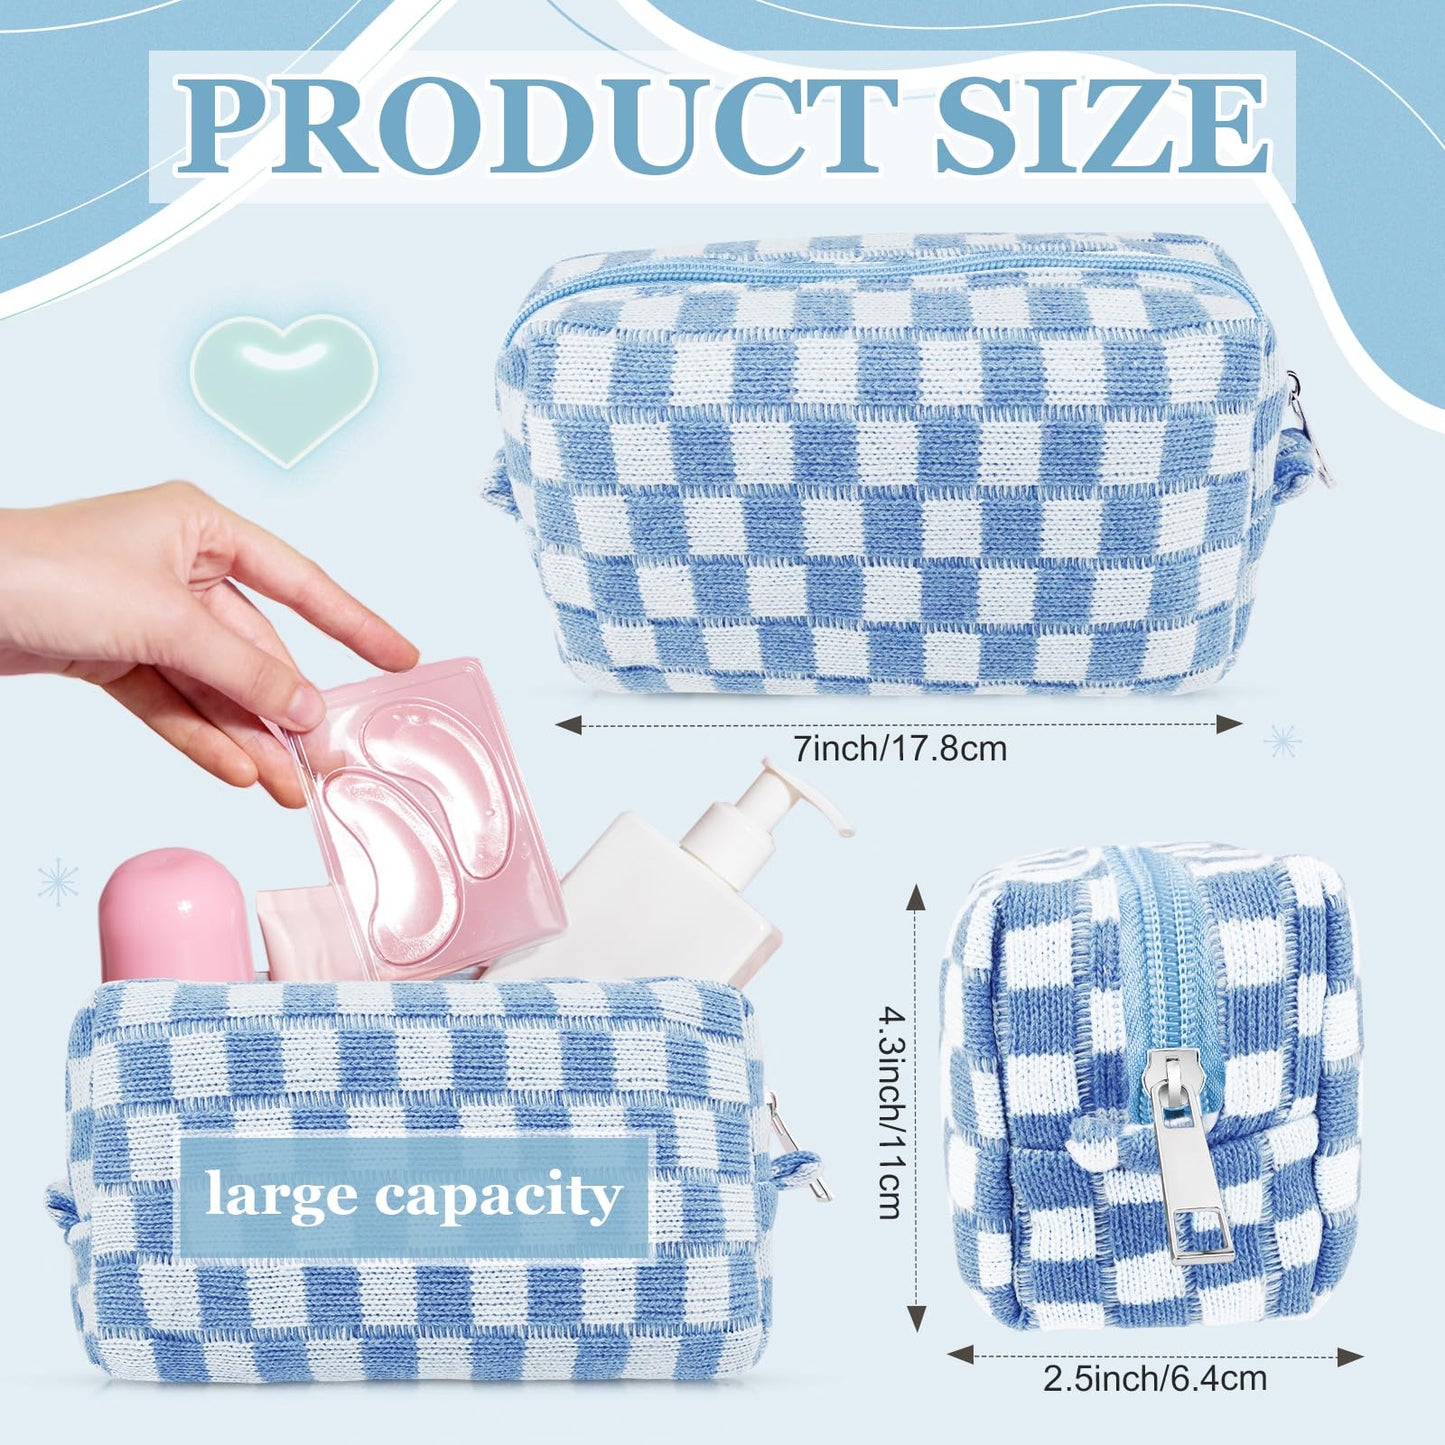 58 Pcs Checkered Makeup Bag Set Preppy Aesthetic Cosmetic Bag Travel Makeup Pouch Toiletry Bag 7 Heishi Surfer Bracelets with 50 Cute Preppy Stickers for Women Girls Teens Gift (Blue)